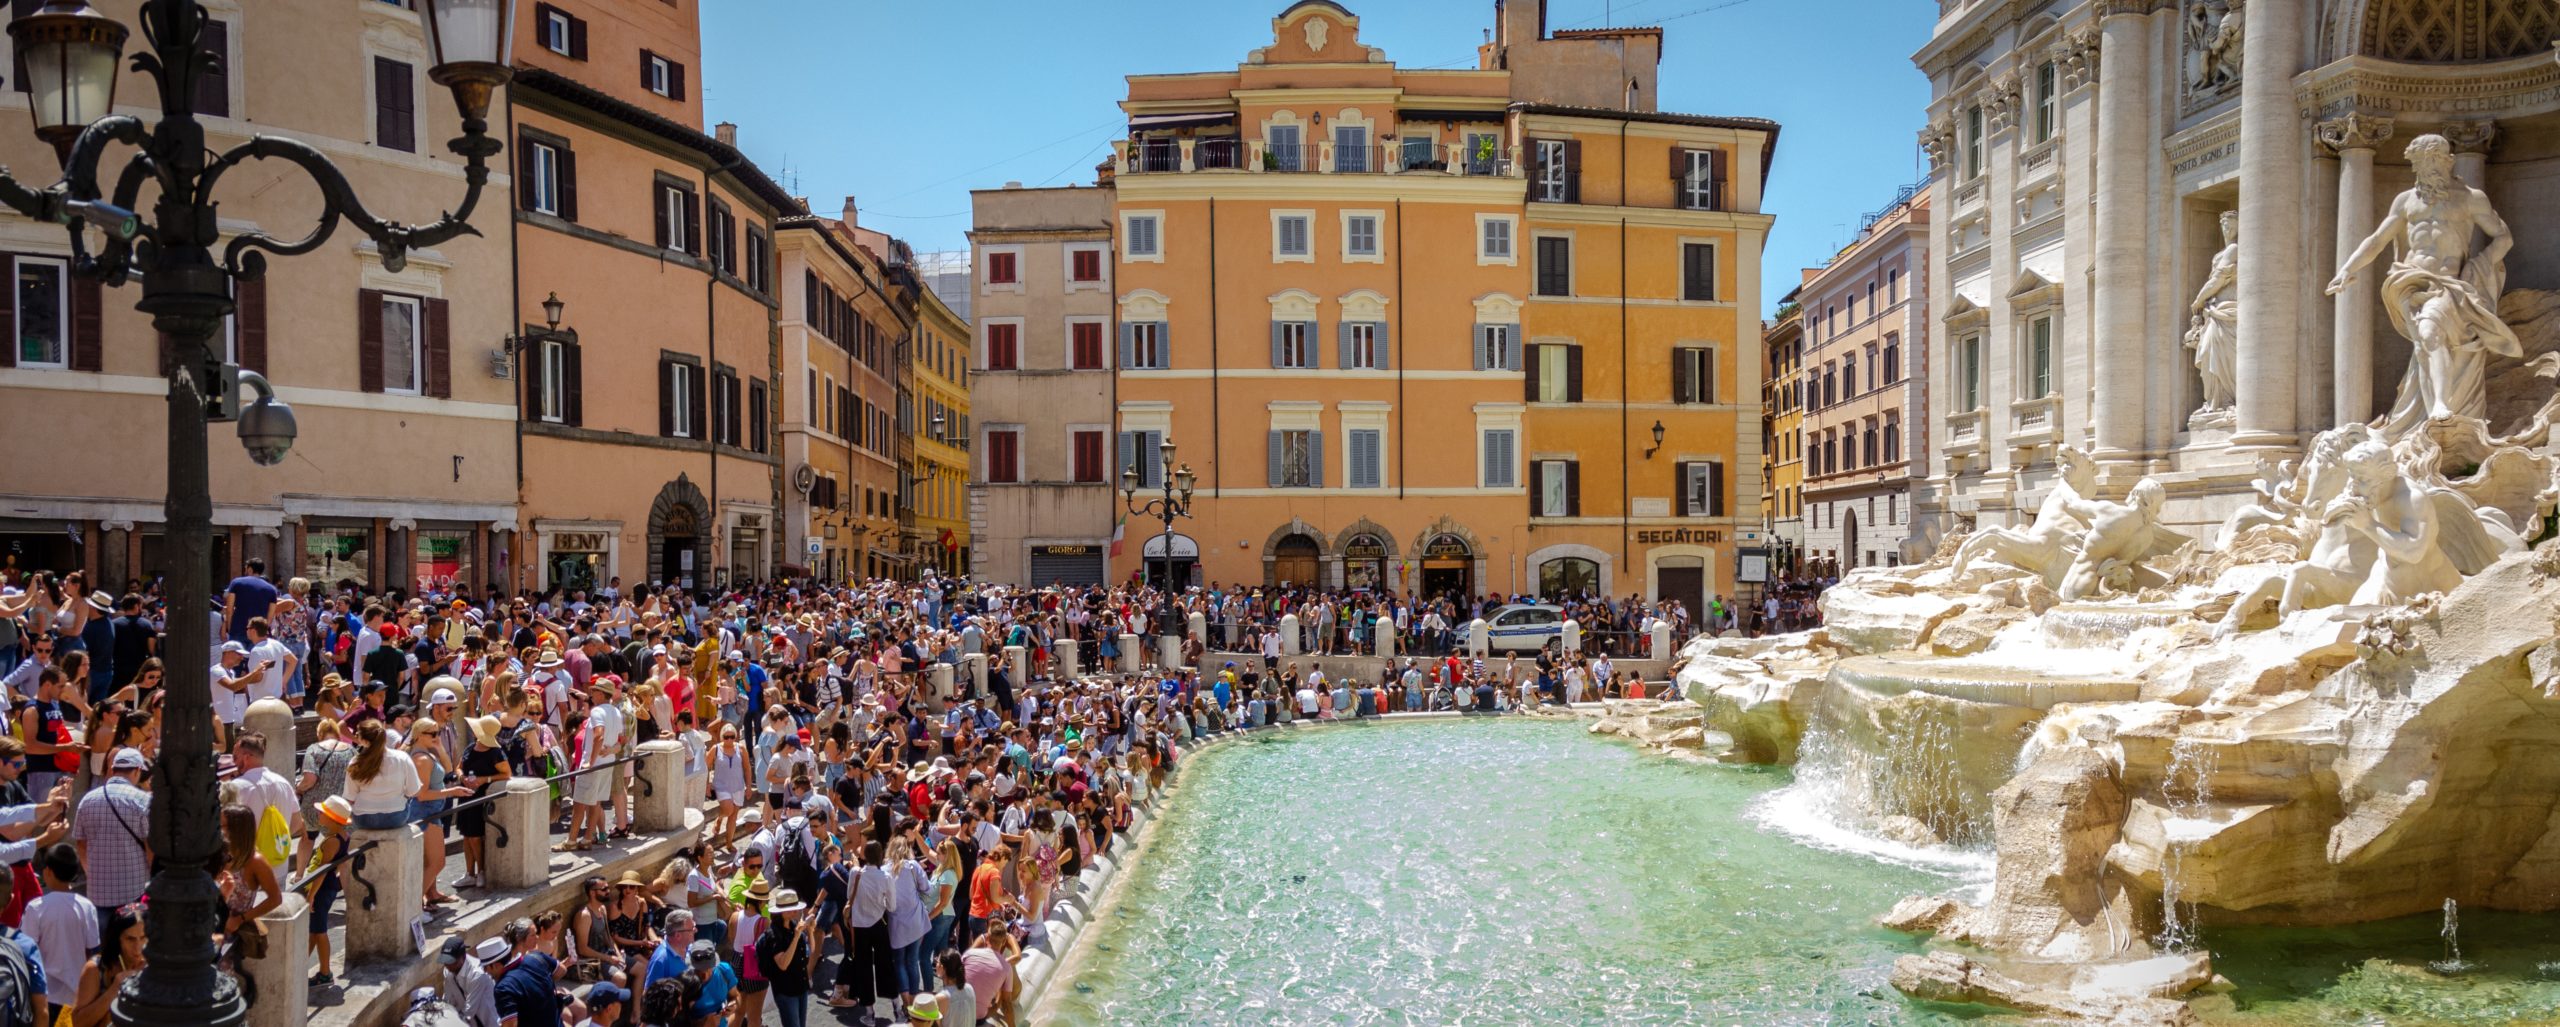 Shows overtourism at Trevi Fountain in Rome